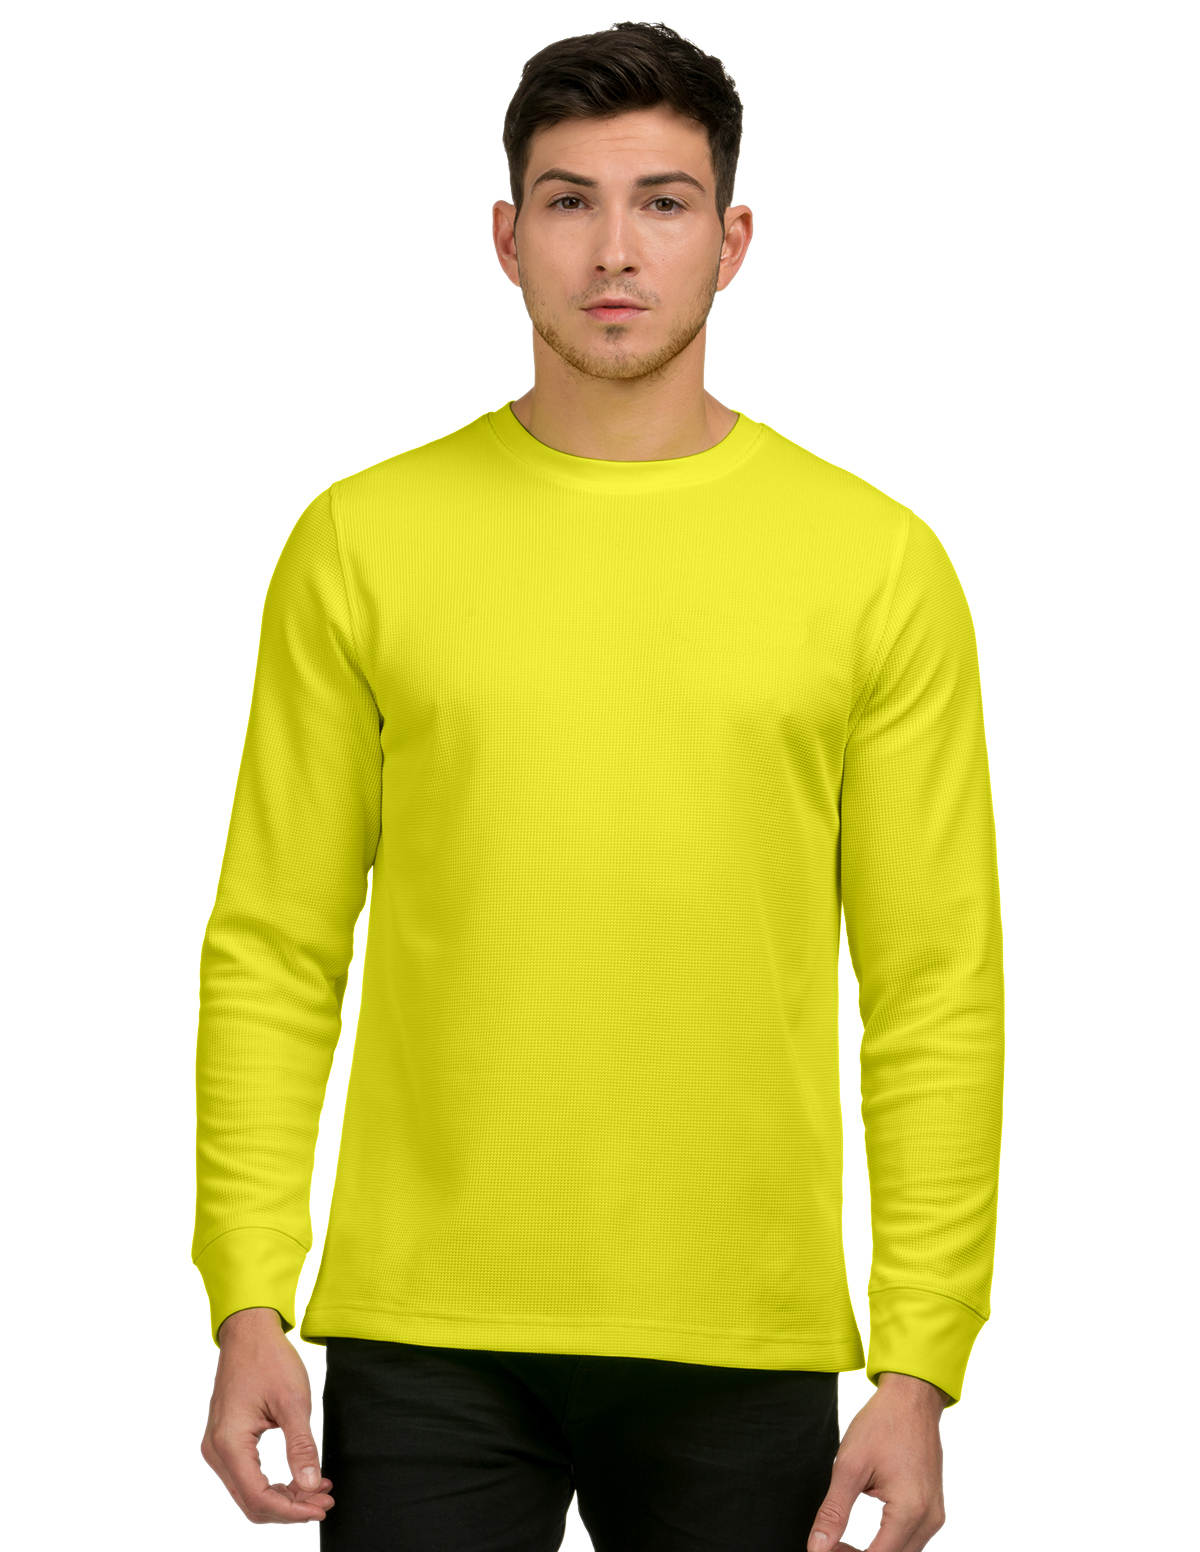 Tri-Mountain K500 - Essent Safety Long Sleeve Safety Thermal